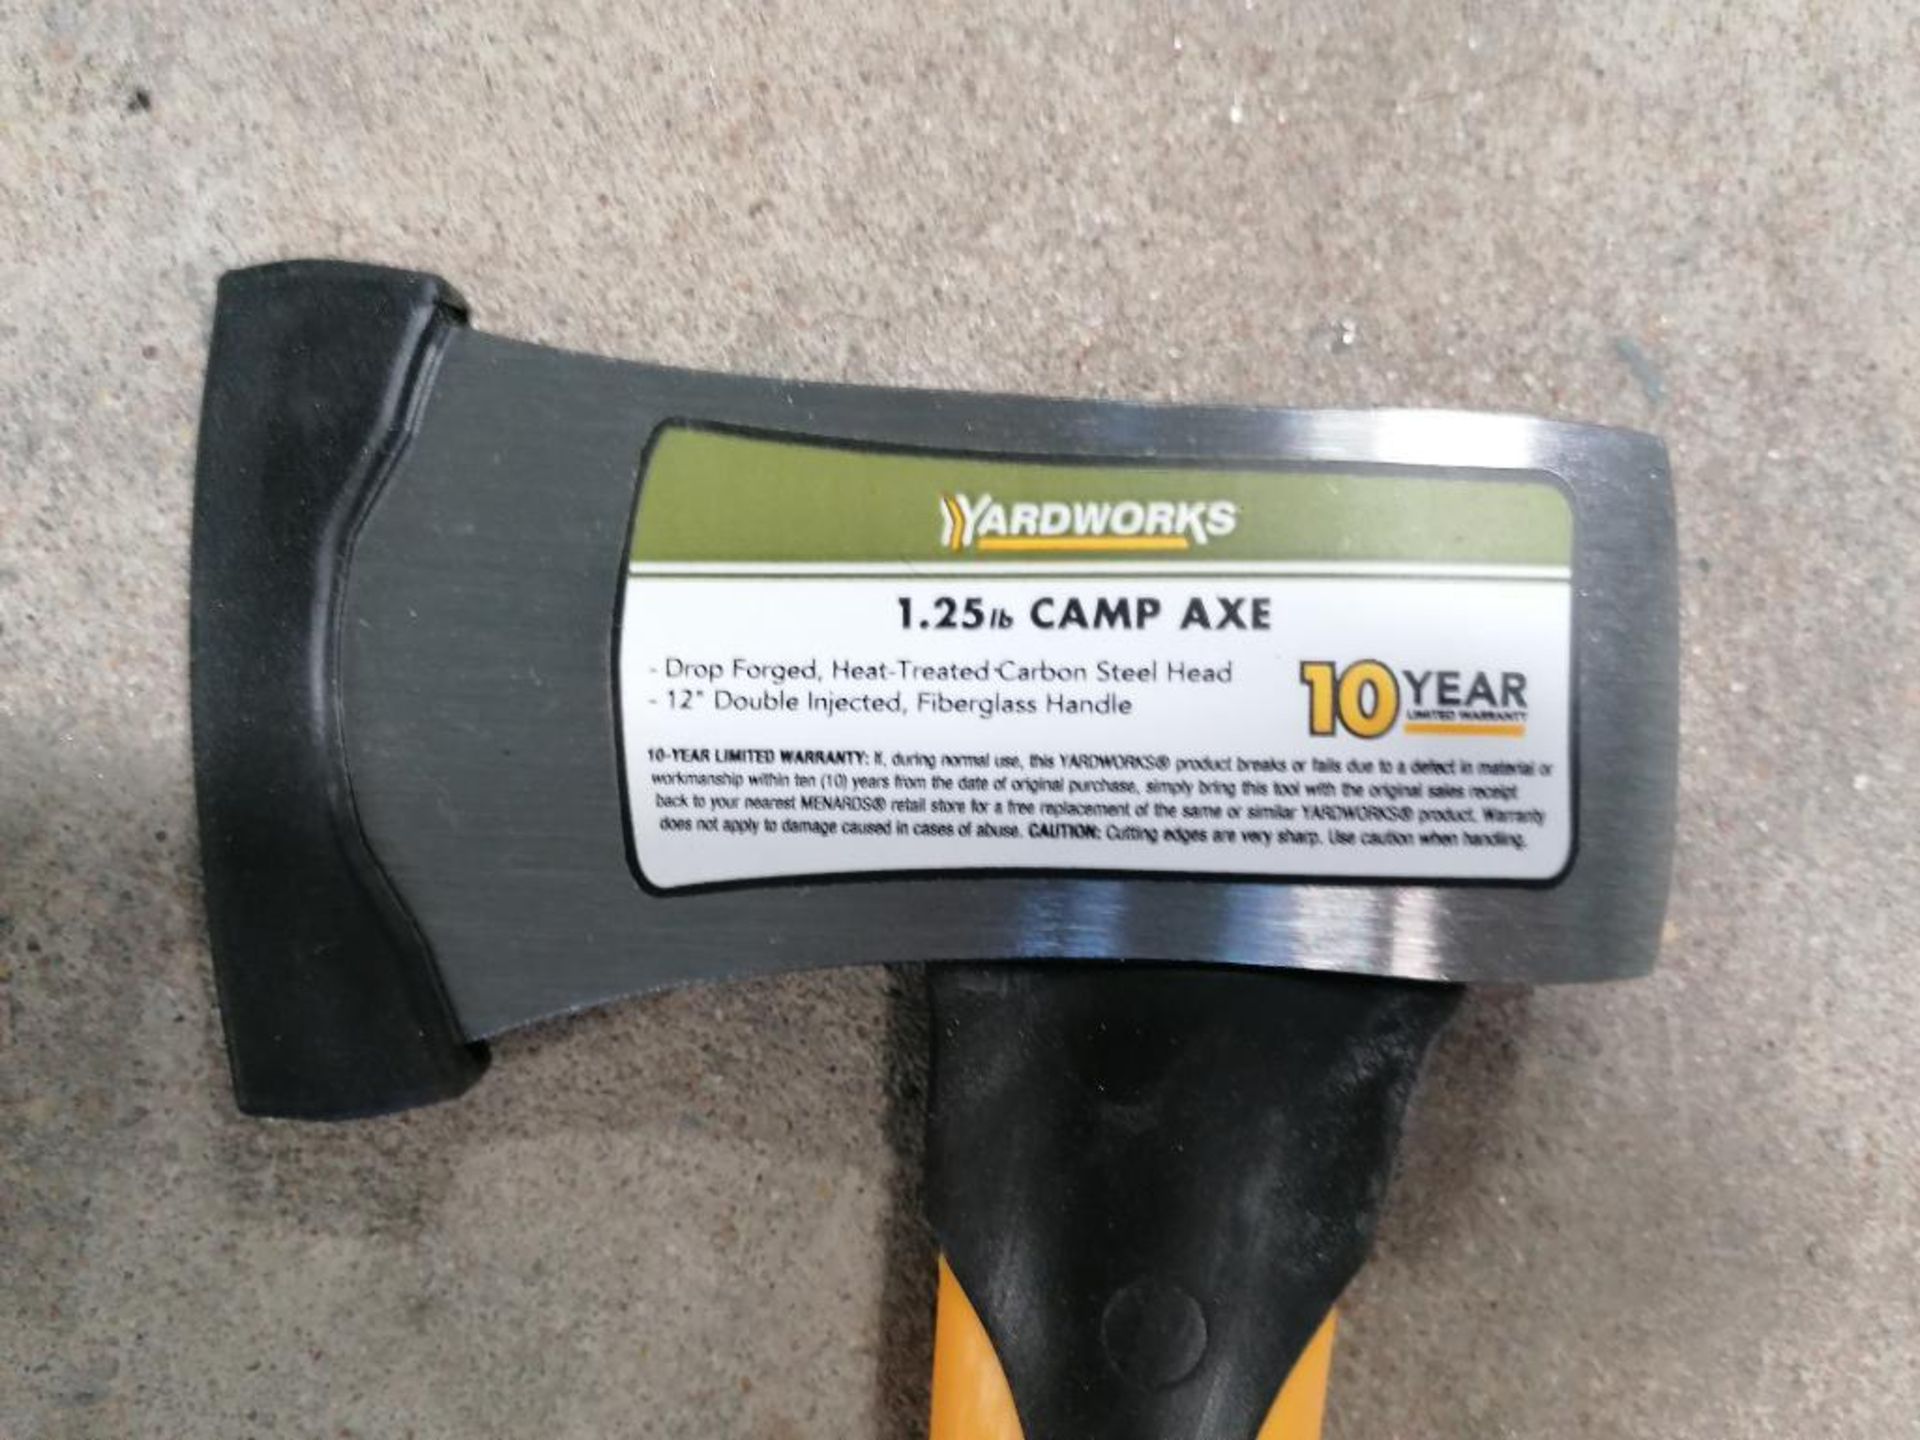 (6) NEW Yardworks 1.25 lbs. Camp Axe. Located in Mt. Pleasant, IA. - Image 3 of 3